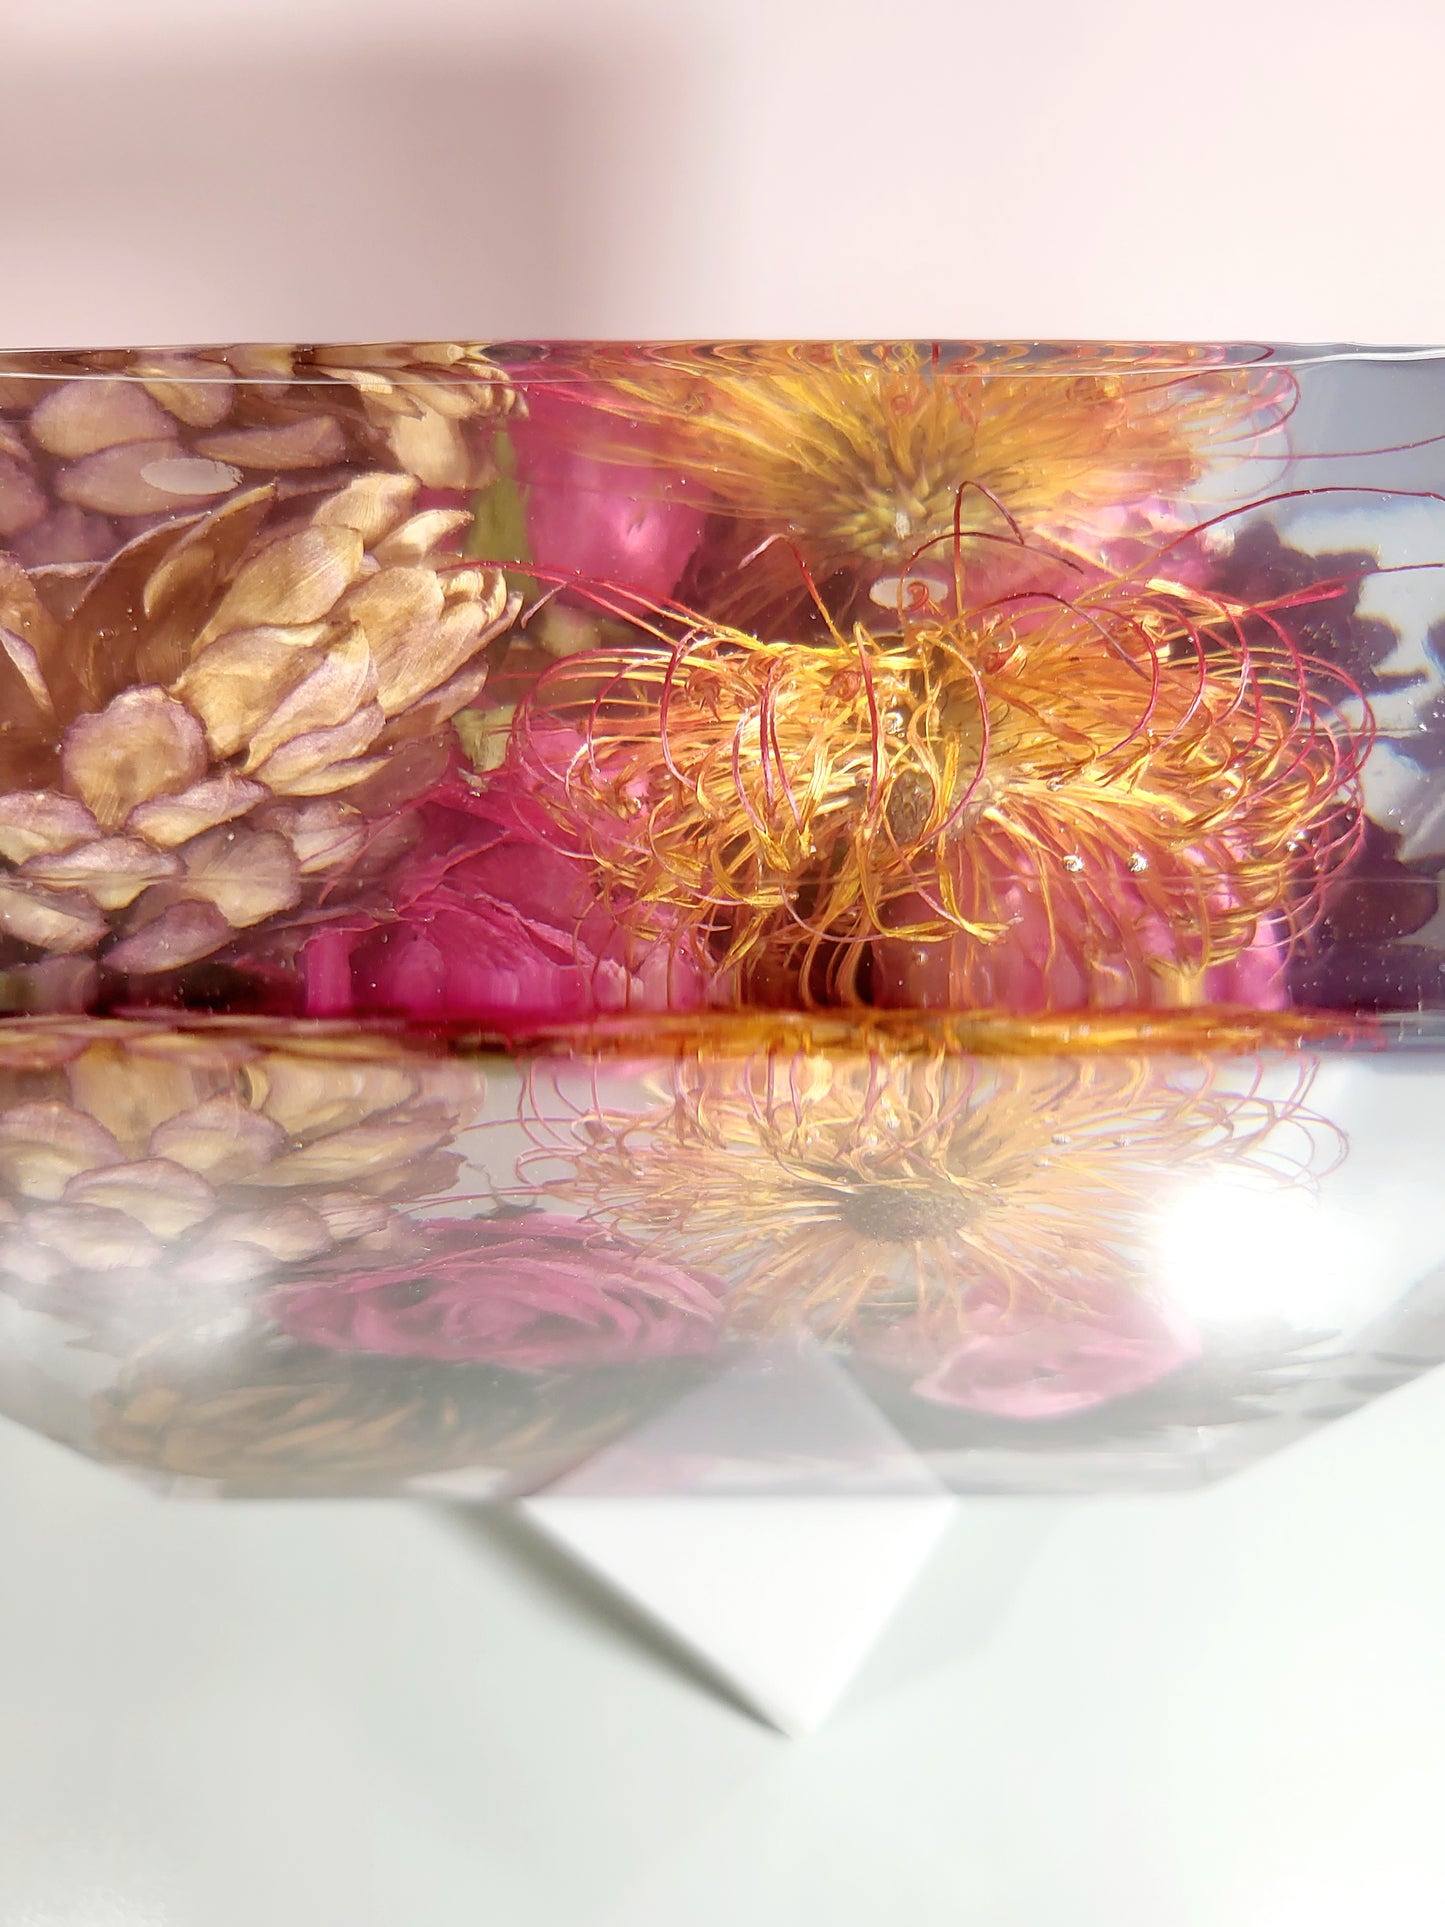 Square 8"x 8" 3D Floral Resin Wedding Bouquet Preservation Modern Fried Flowers Square Save Your Gift Keepsake - flofloflowery